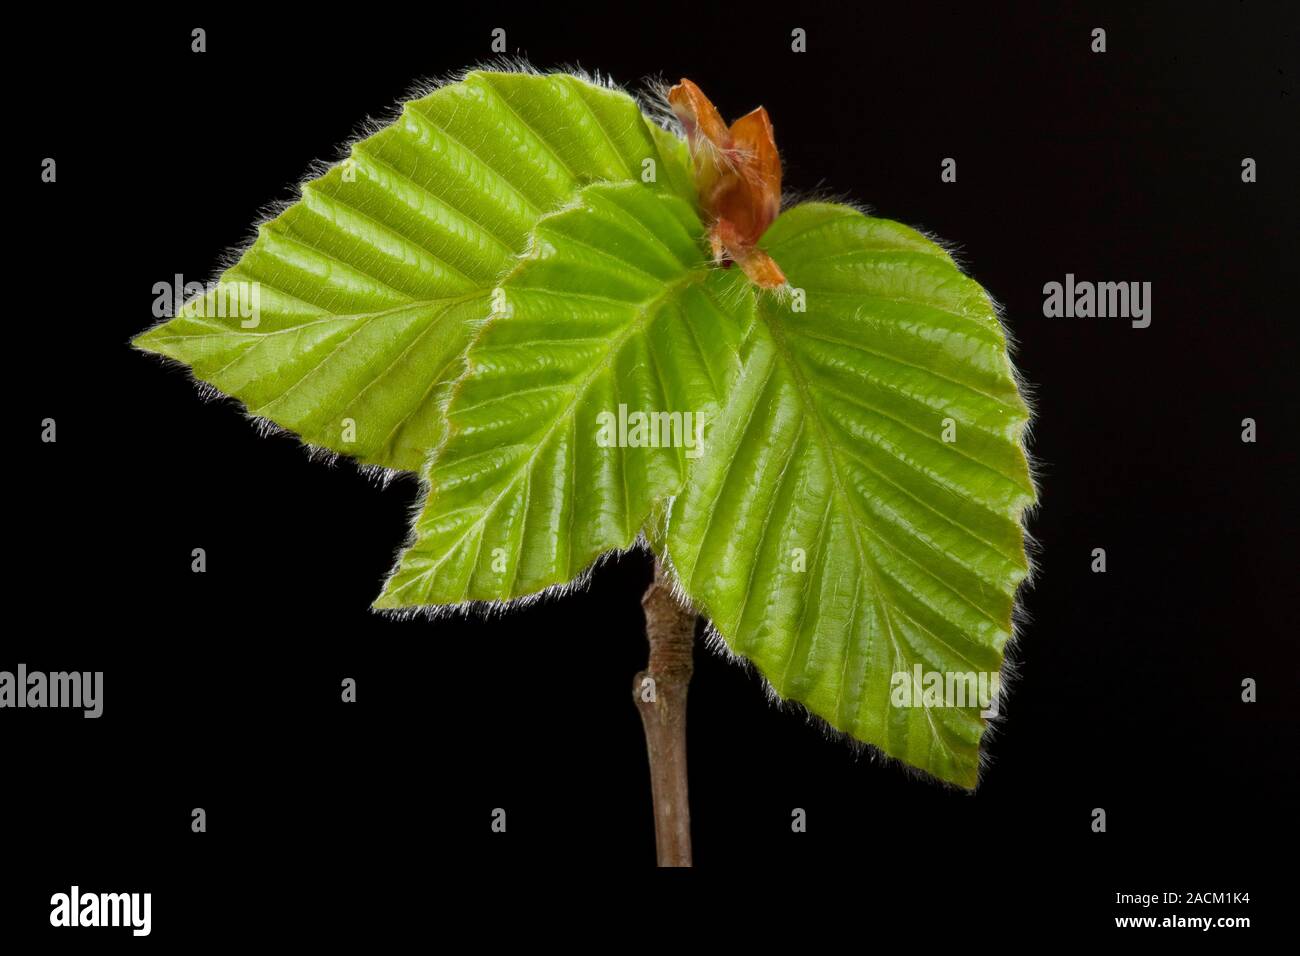 Beech (Fagus sylvatica) tree leaf bud opening in the spring. Stock Photo